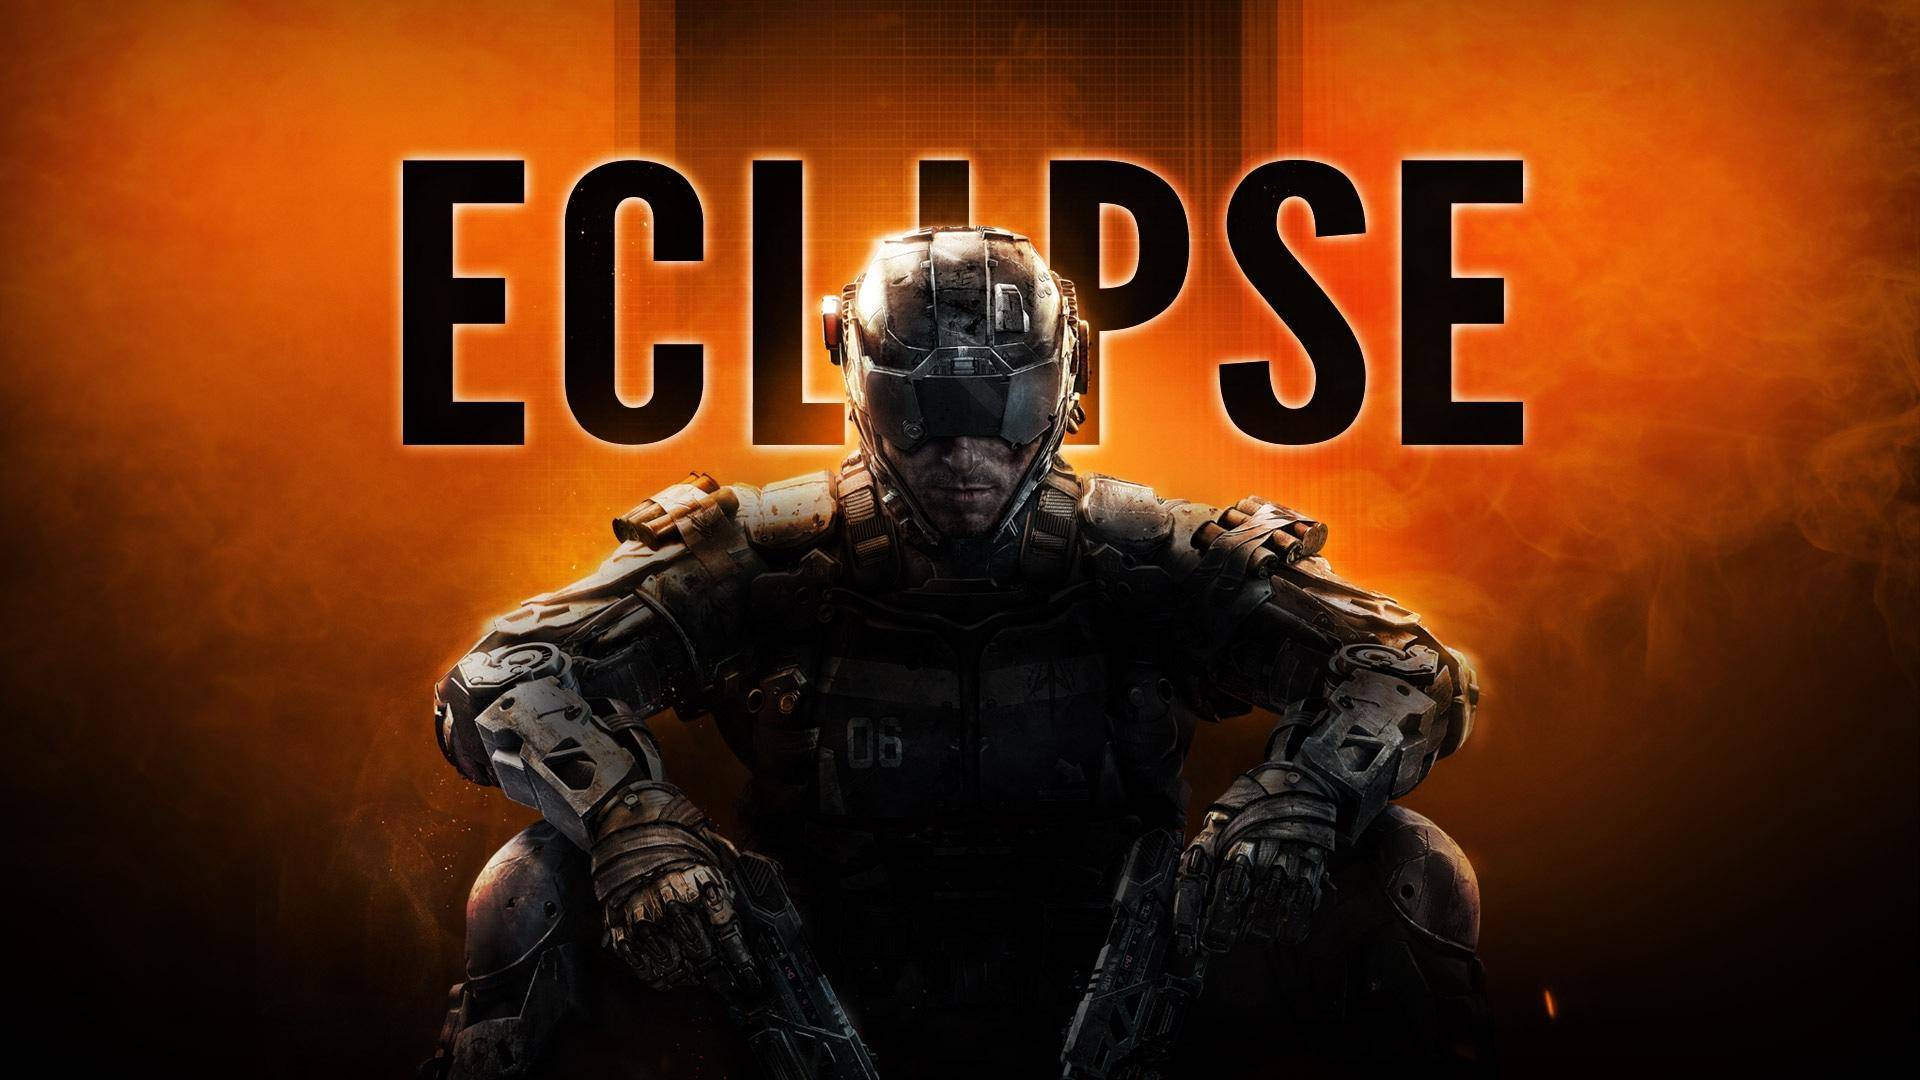 Call Of Duty: Black Ops 3 DLC Eclipse is finally available on PC and Xbox One